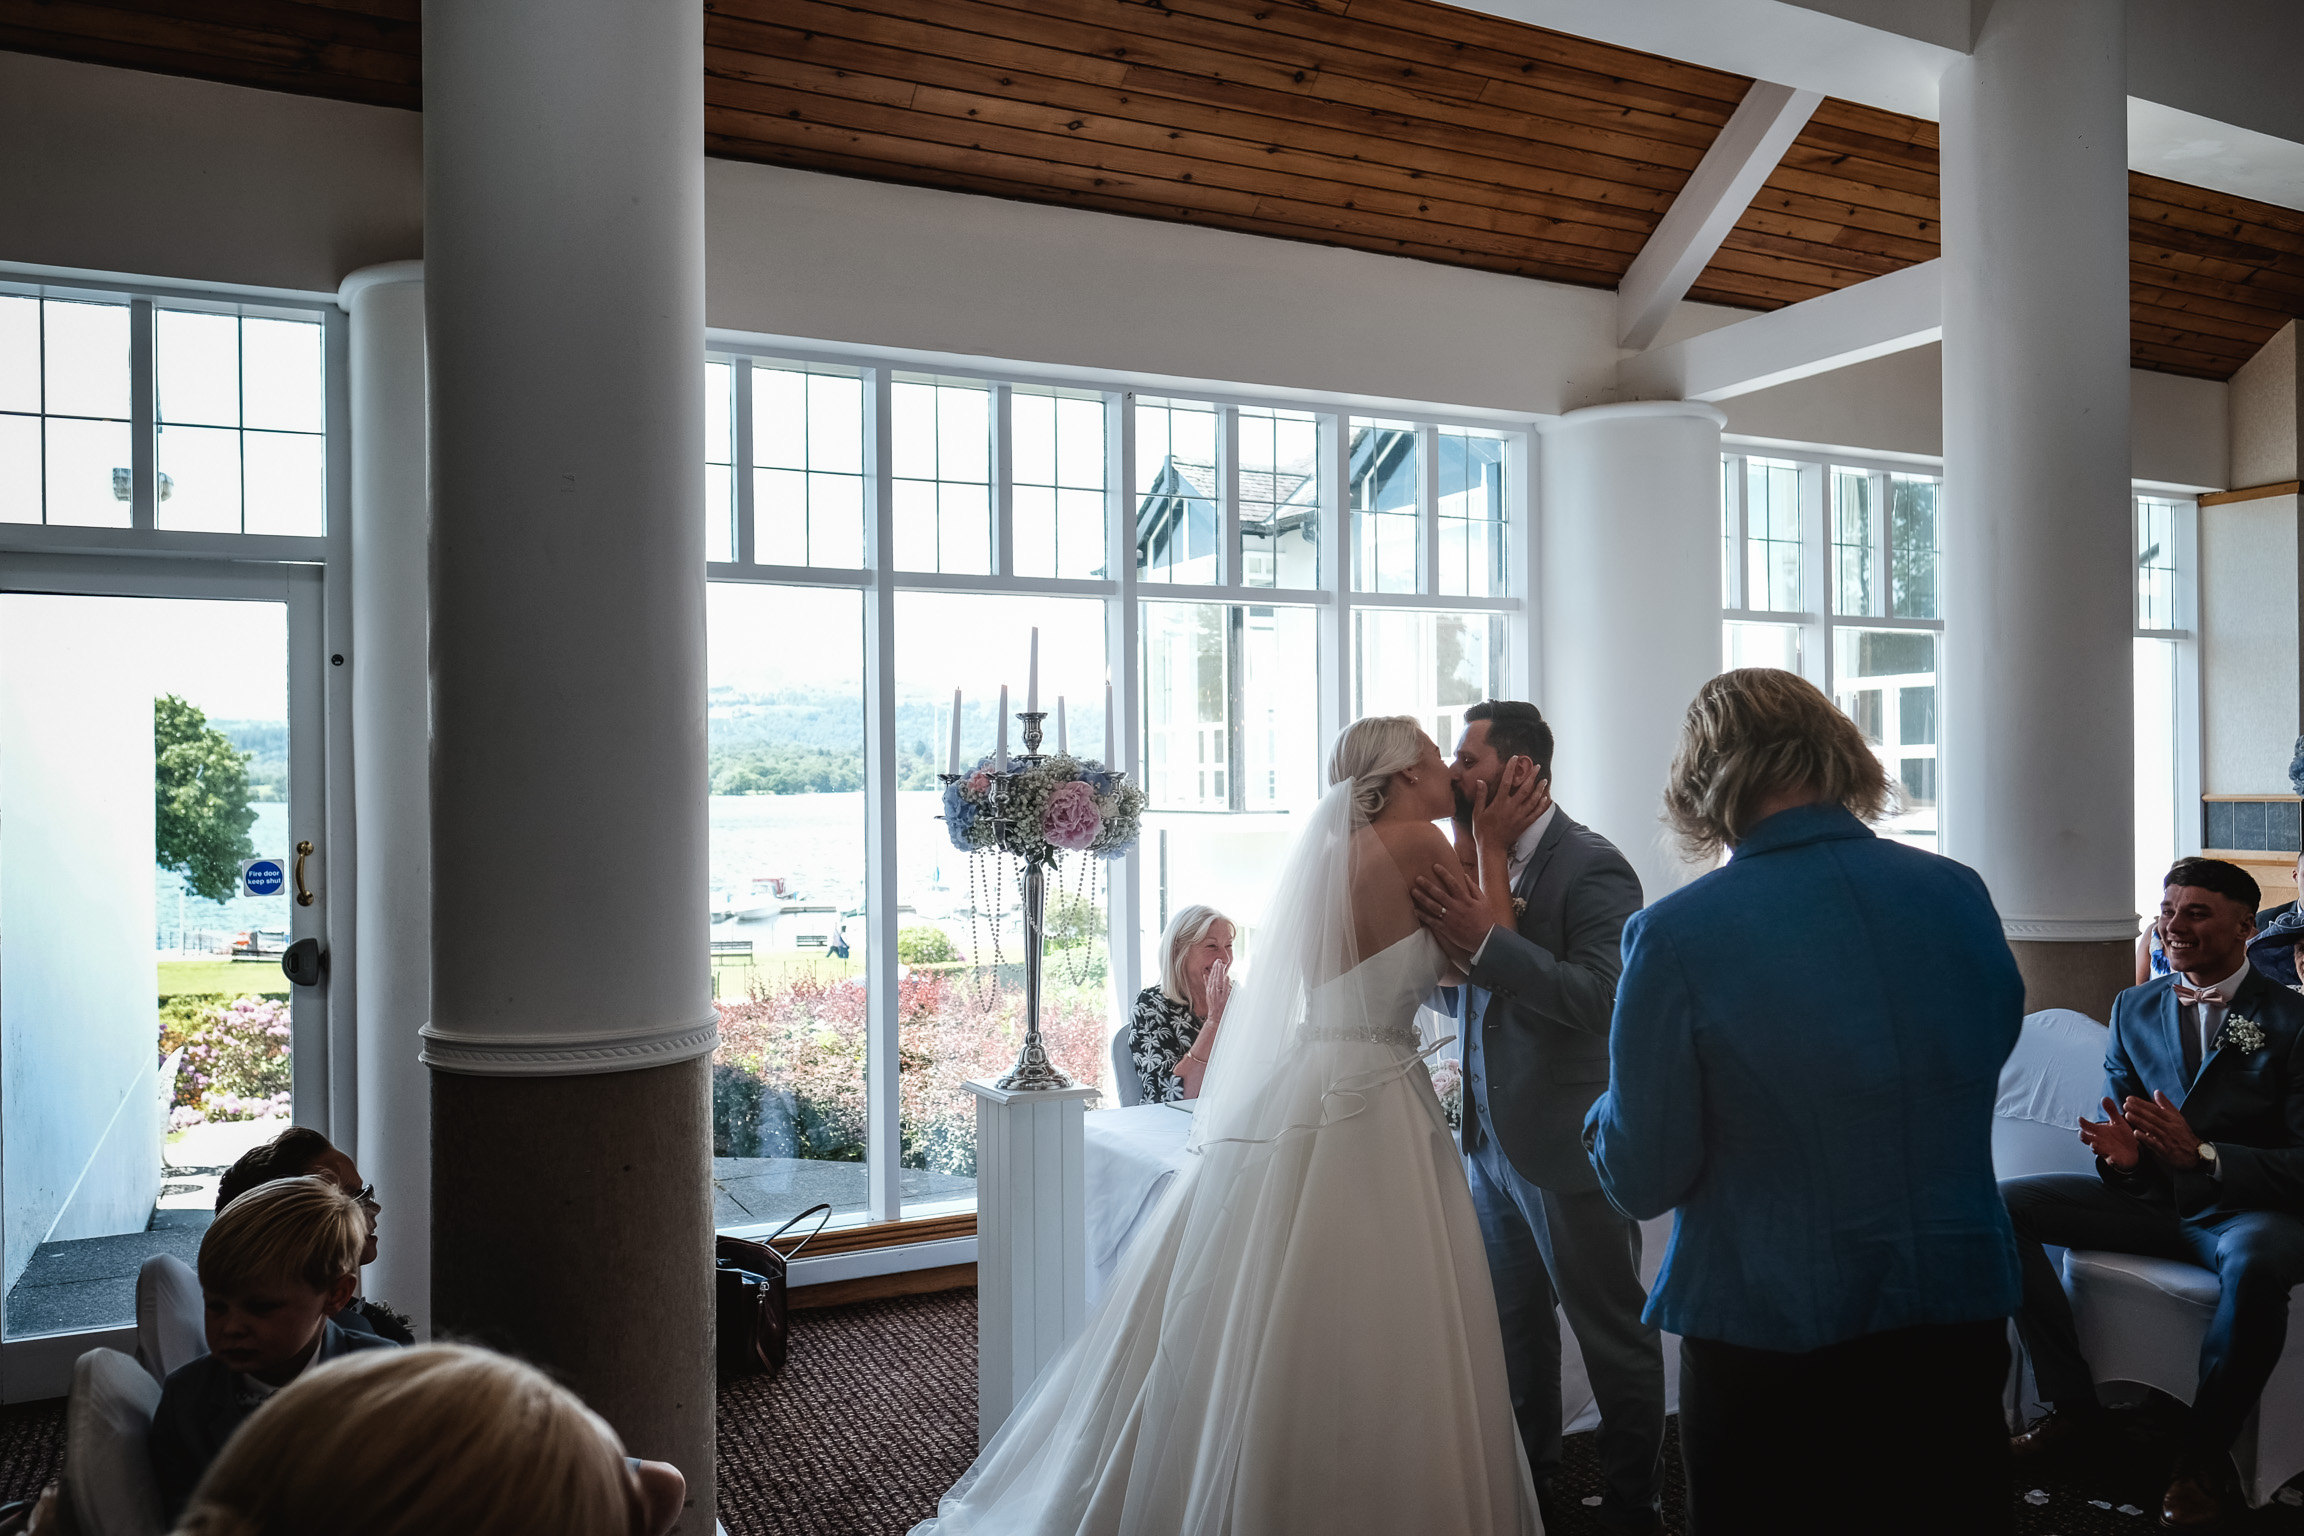 Low wood bay wedding photographer in widermere documentry wedding photography north west cumbria (45 of 131).jpg